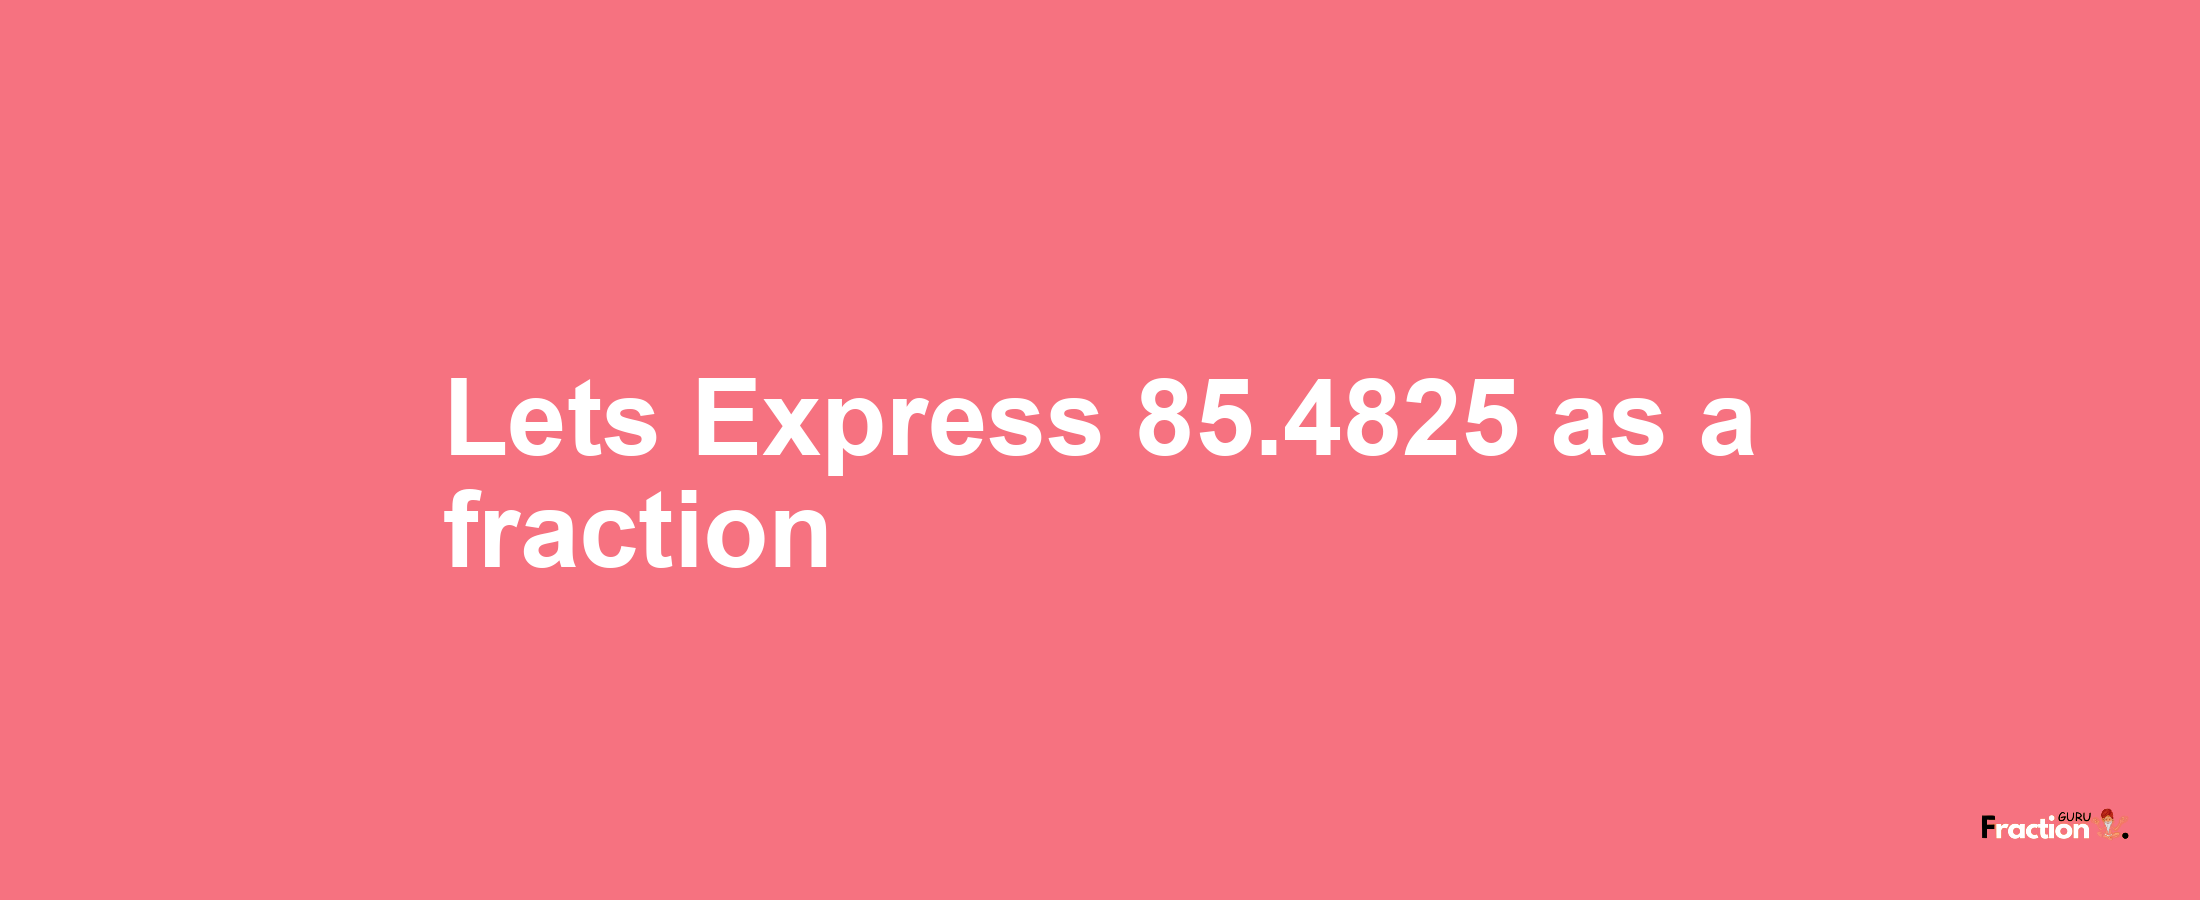 Lets Express 85.4825 as afraction